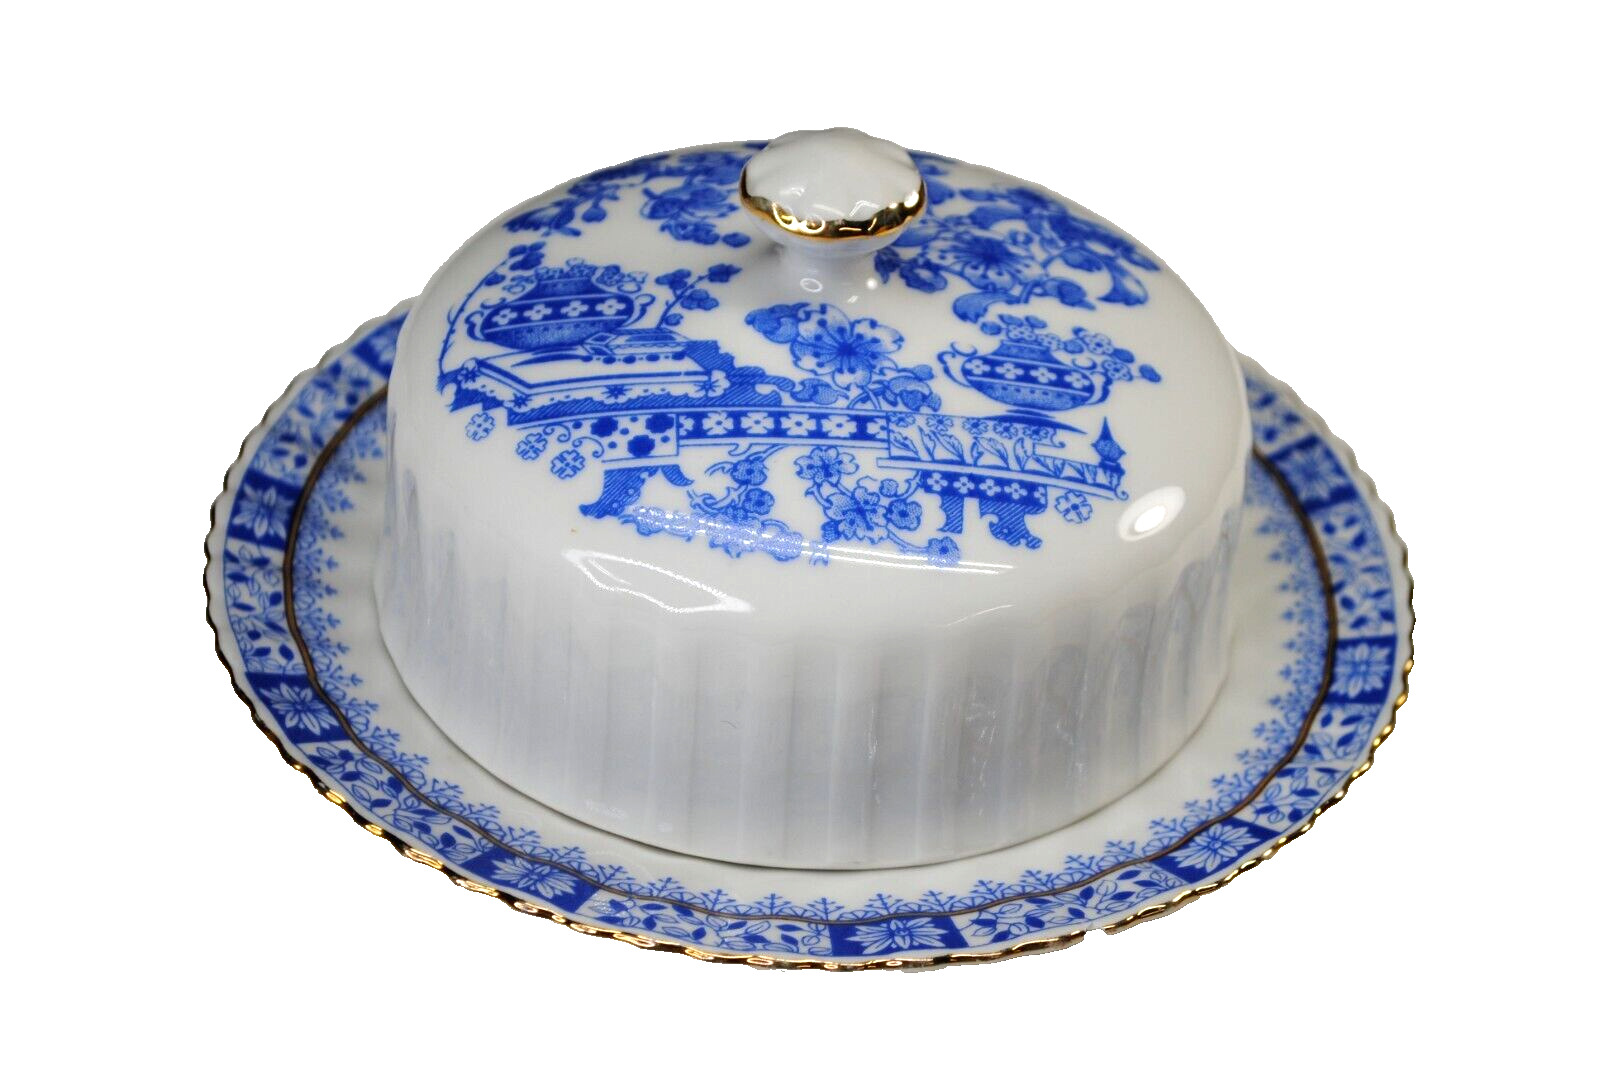 RARE- VINTAGE CHINA BLAU BY SELTMANN ROUND COVERED BUTTER DISH BAVARIA